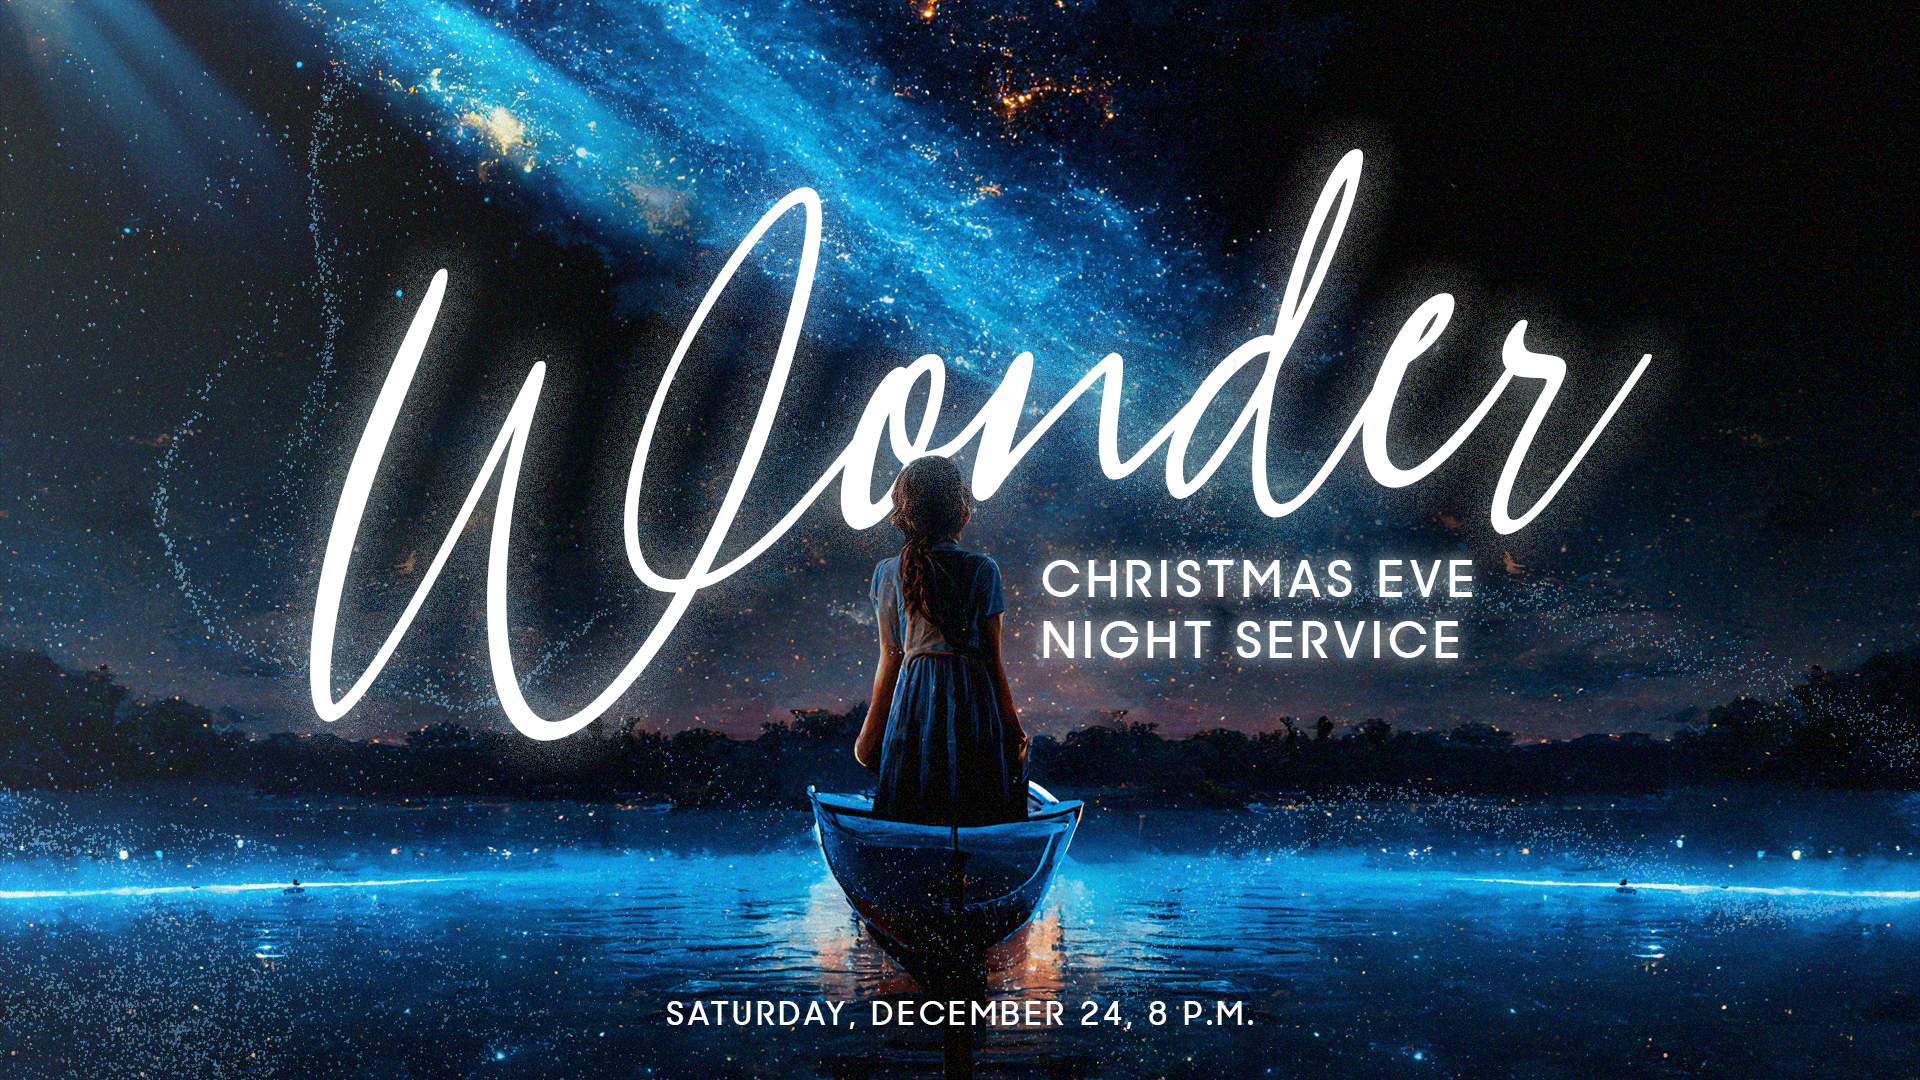 Christmas Eve Night Service with Candlelight and Carols